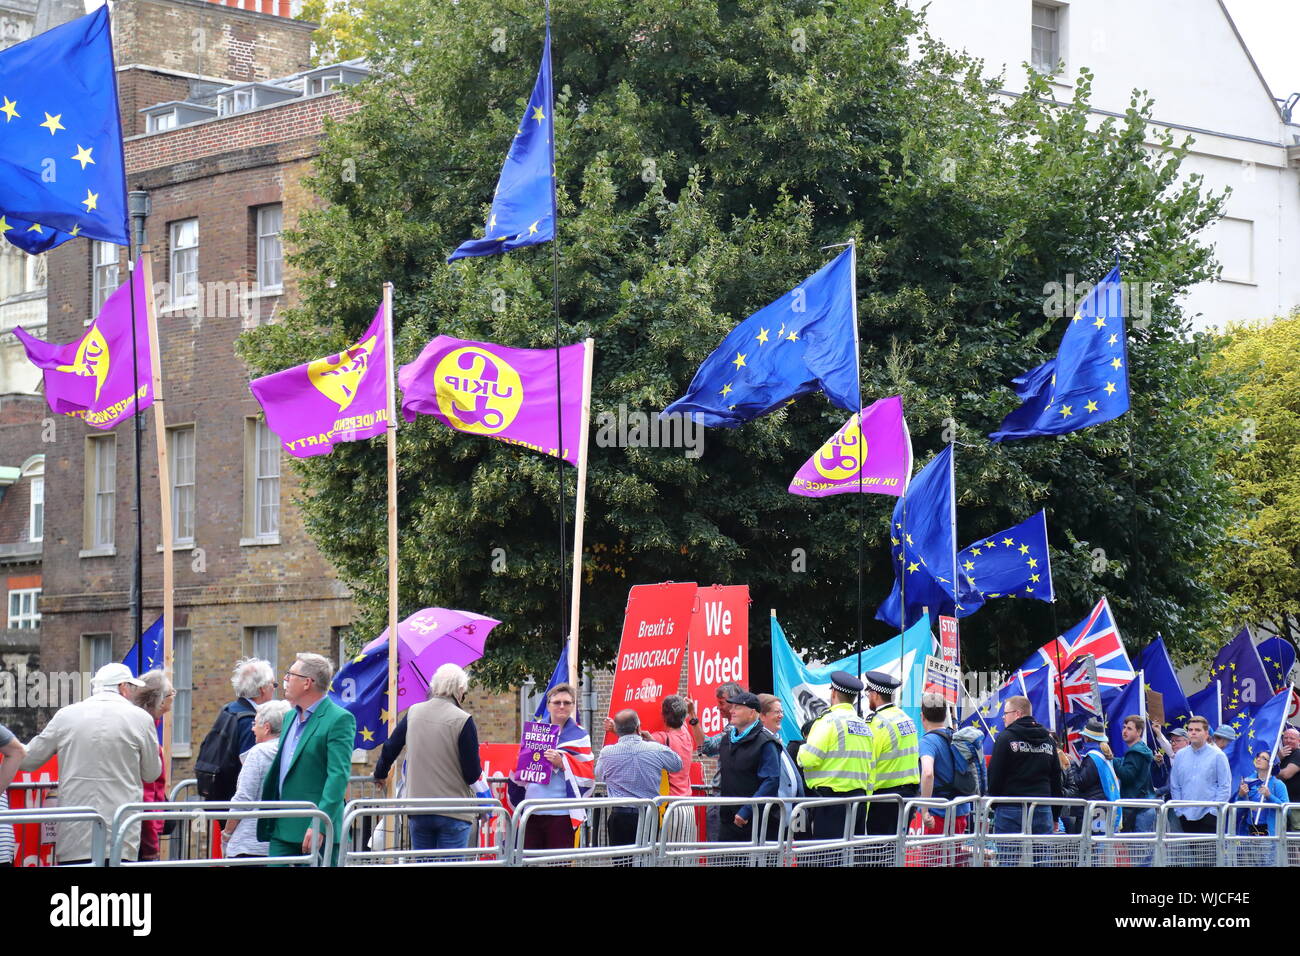 London, UK, 3rd Sep 2019, While Pro-EU campaigners criticize Boris Johnson’s prorogation of the parliament, Brexit supporters  show their anger against MP's not implementing the Brexit referendum's result at Whitehall. Credit: Uwe Deffner / Alamy Live News Stock Photo